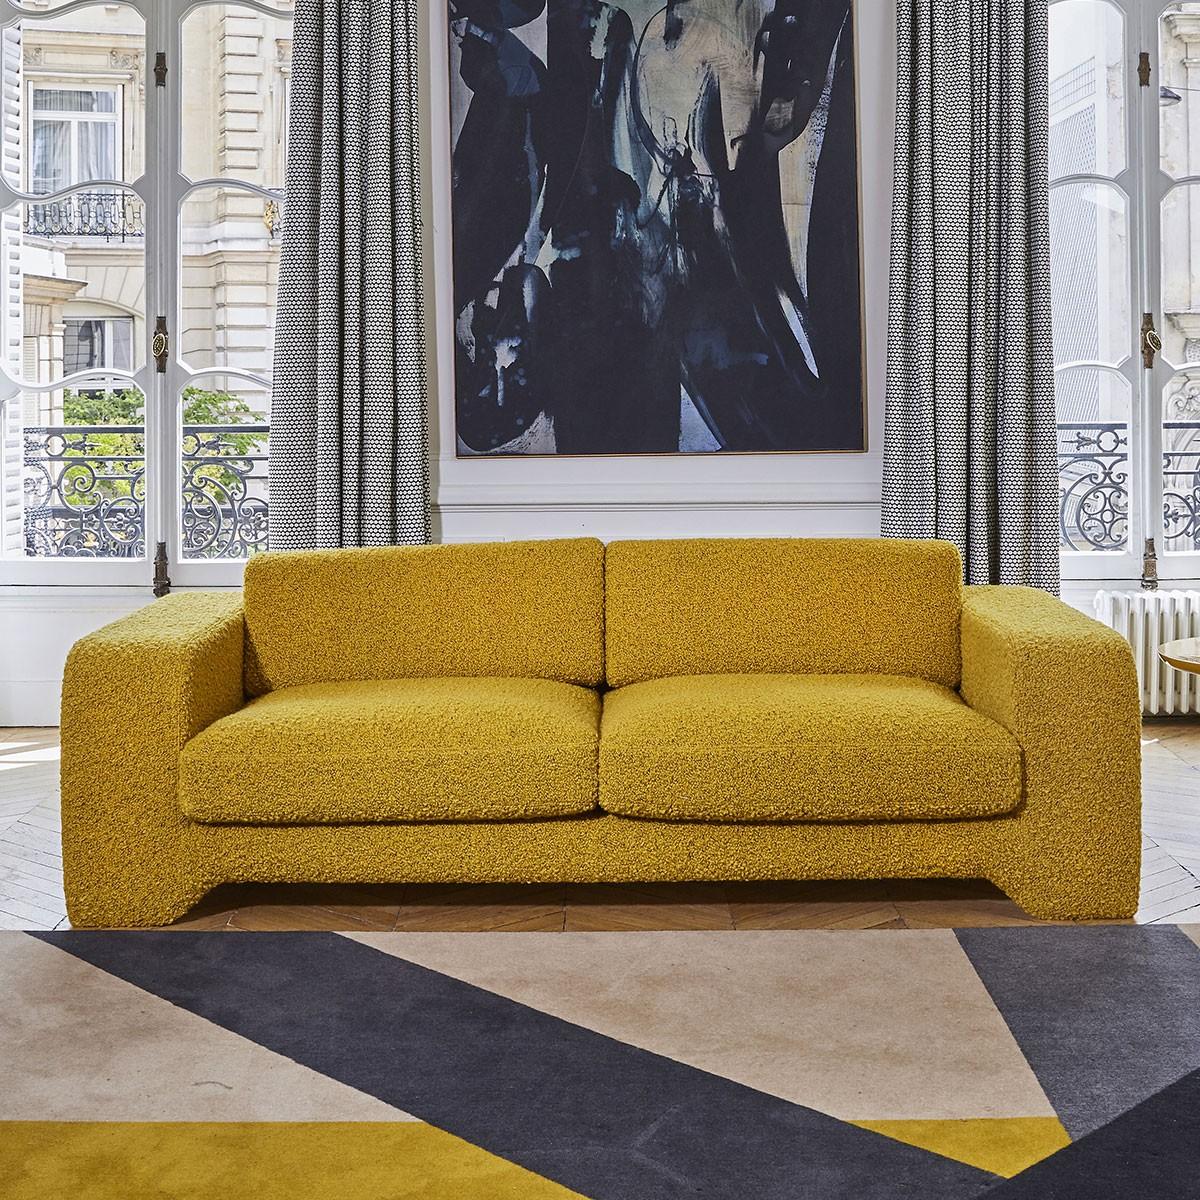 Popus Editions Giovanna 2.5 Seater Sofa in Yellow Como Velvet Upholstery.

Giovanna is a sofa with a strong profile. A sober, plush line, with this famous detail that changes everything, so as not to forget its strength of character and this